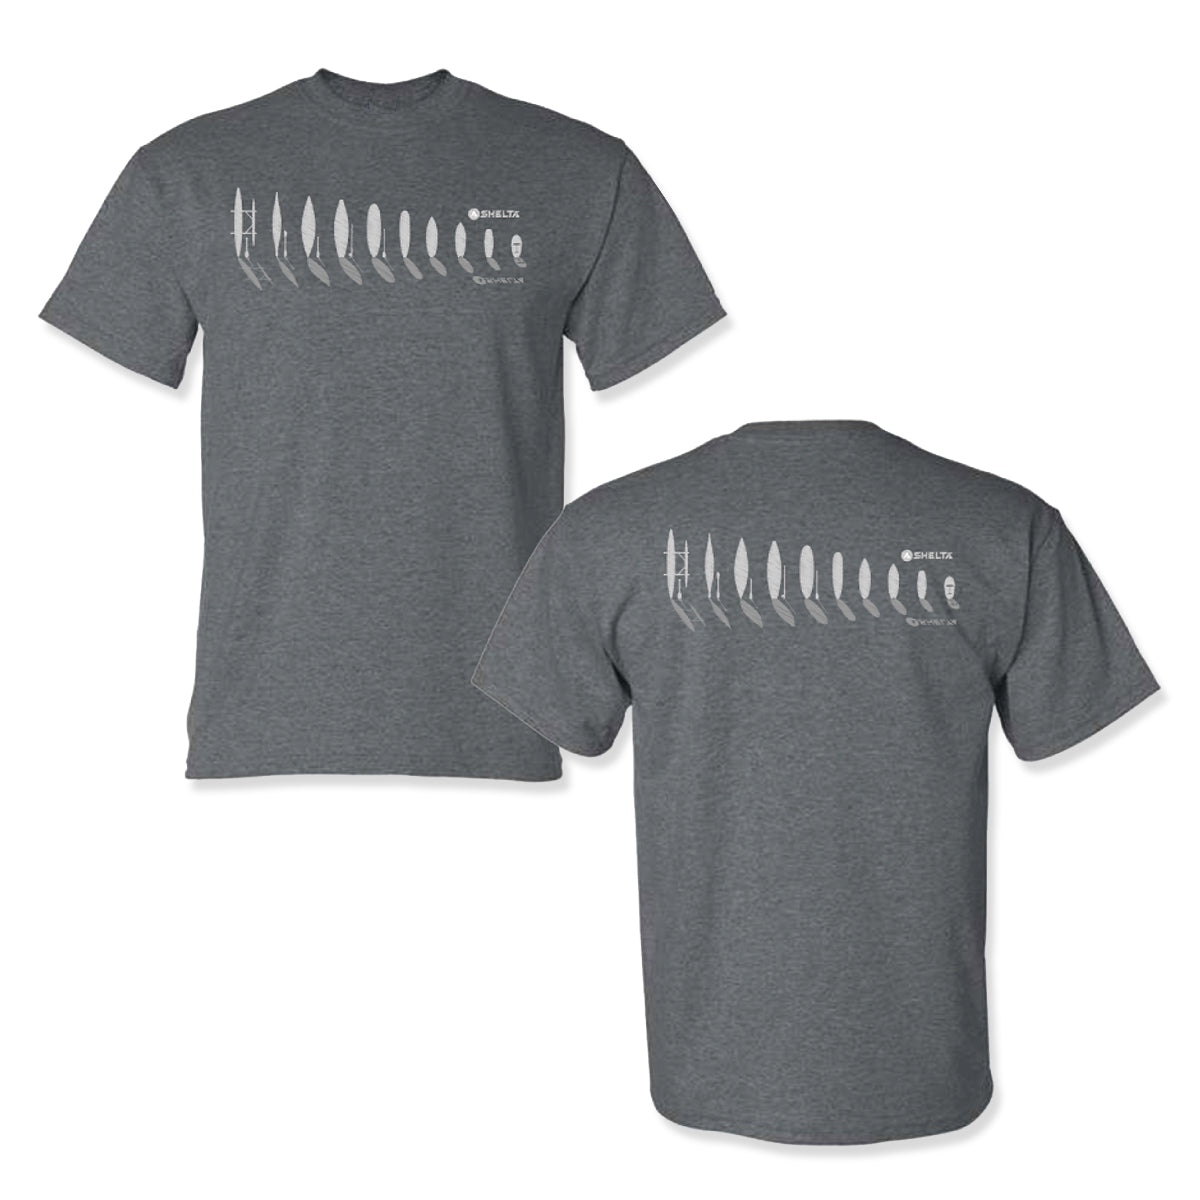 Shadow Craft in Heather Grey. This heavy-duty 50/50 T-Shirt is made to work for you. This fabric is specifically designed to wick moisture away from the body, helping to keep you dry and cool. Soft, preshrunk cotton is blended with durable, colorfast polyester for optimal quality